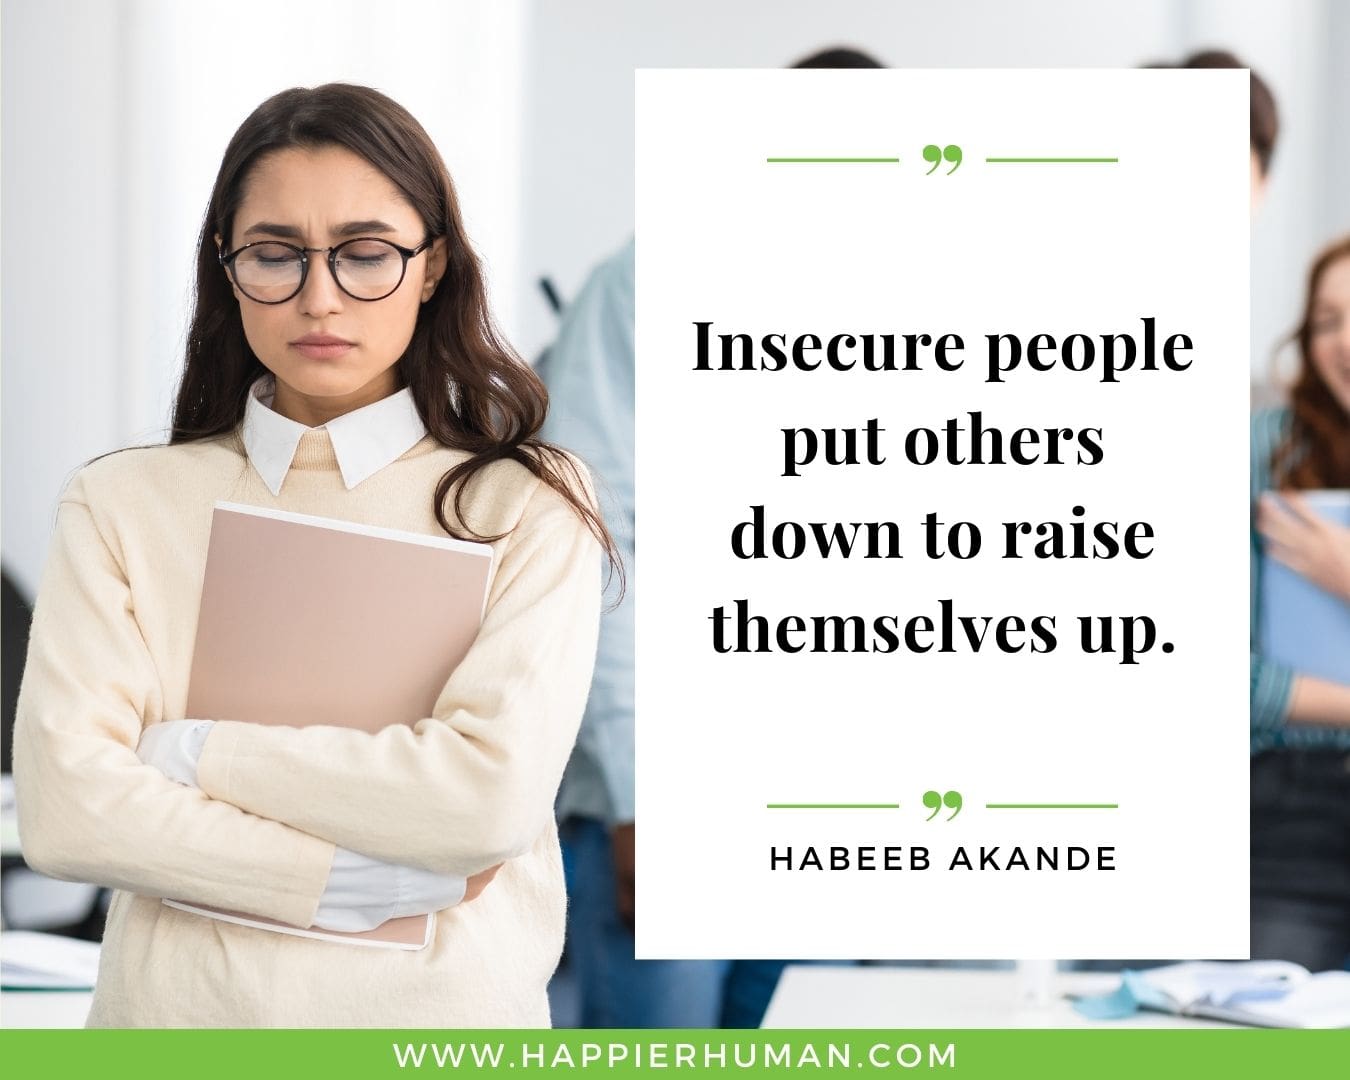 Haters Quotes - “Insecure people put others down to raise themselves up.” - Habeeb Akande